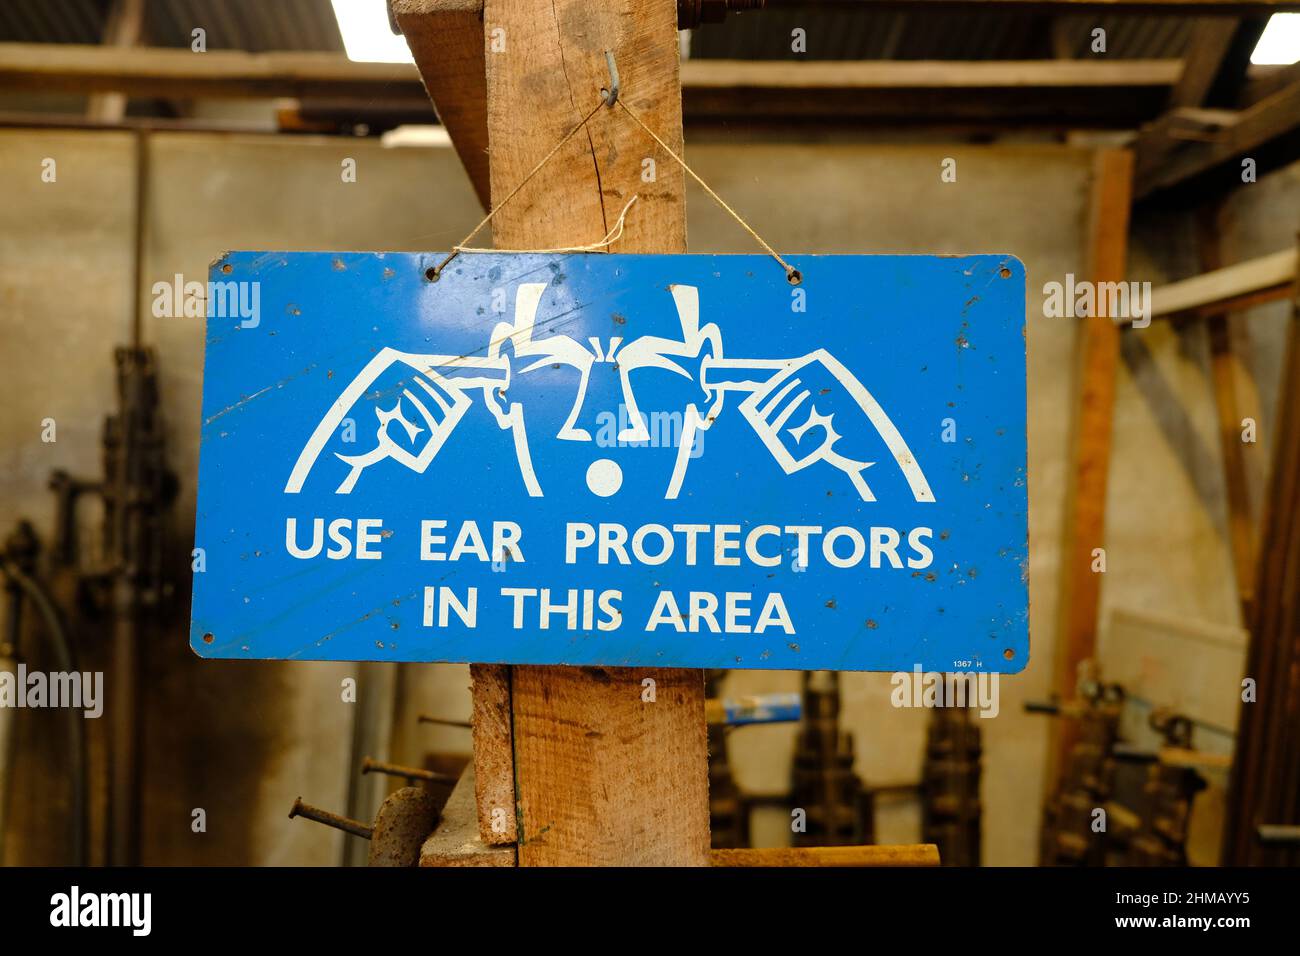 Metal sign warning to user ear protectors due to loud noises Stock Photo